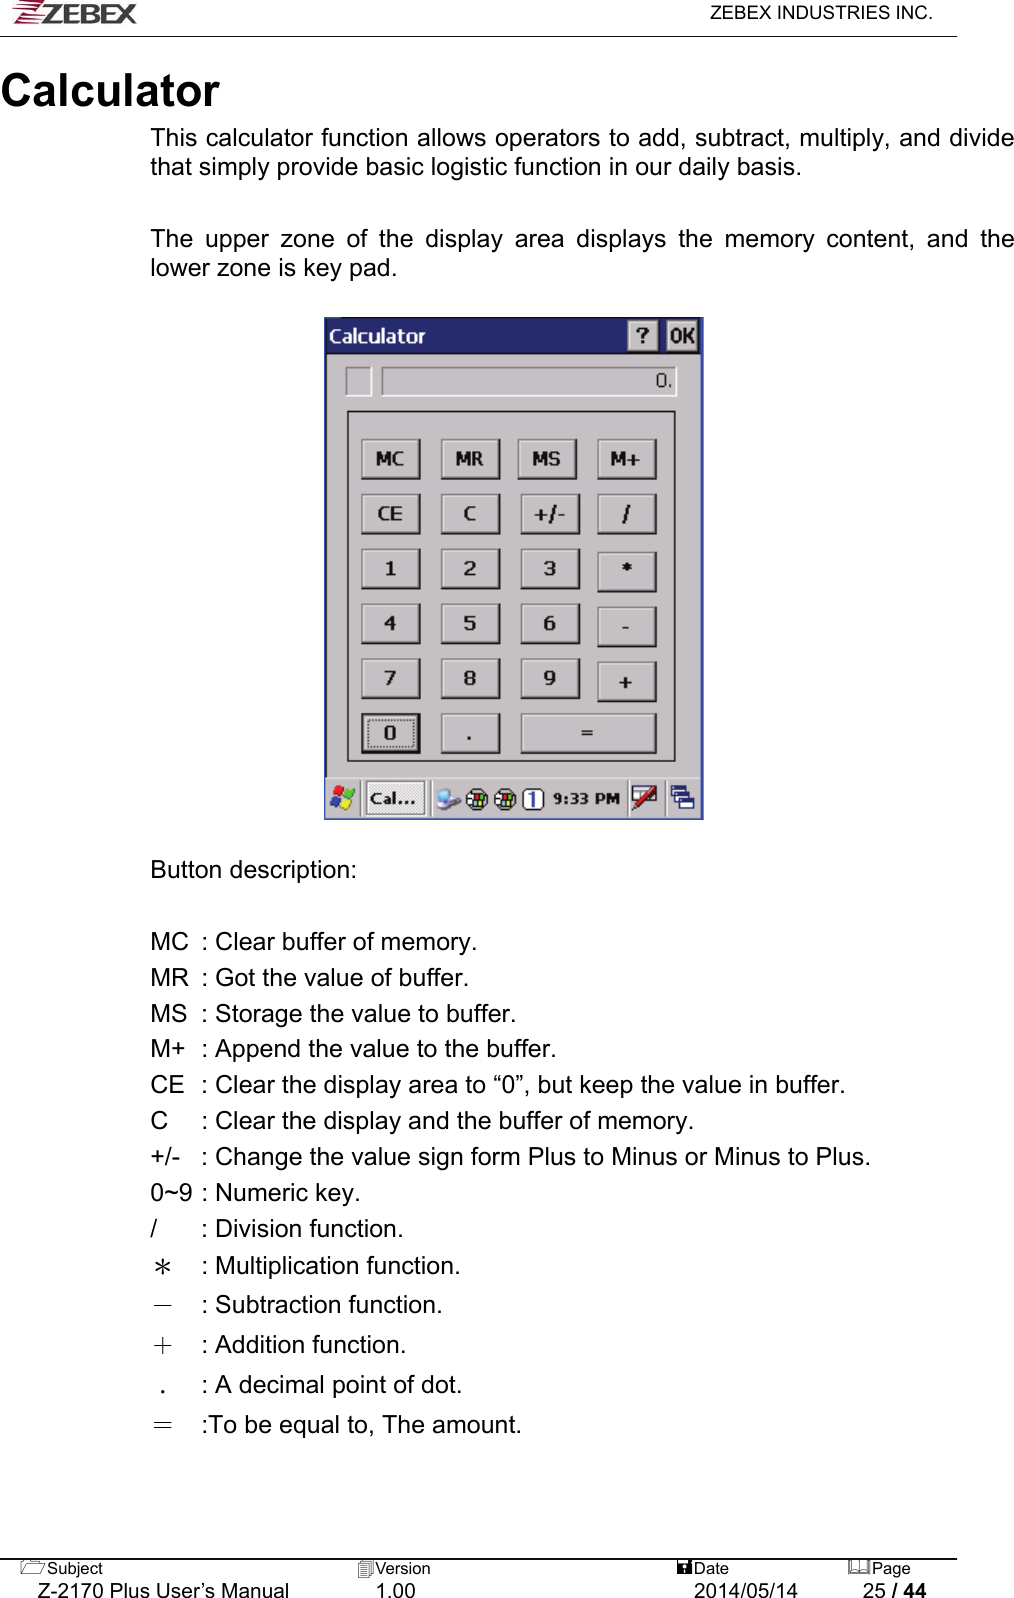   ZEBEX INDUSTRIES INC.  Calculator  This calculator function allows operators to add, subtract, multiply, and divide that simply provide basic logistic function in our daily basis.    The upper zone of the display area displays the memory content, and the lower zone is key pad.    Button description:    MC  : Clear buffer of memory. MR  : Got the value of buffer.   MS  : Storage the value to buffer. M+  : Append the value to the buffer. CE  : Clear the display area to “0”, but keep the value in buffer. C  : Clear the display and the buffer of memory. +/-  : Change the value sign form Plus to Minus or Minus to Plus. 0~9 : Numeric key. /  : Division function.   ＊  : Multiplication function. －  : Subtraction function. ＋  : Addition function. ﹒  : A decimal point of dot. ＝  :To be equal to, The amount.   Subject  Version   DatePage   Z-2170 Plus User’s Manual  1.00  2014/05/14  25 / 44 